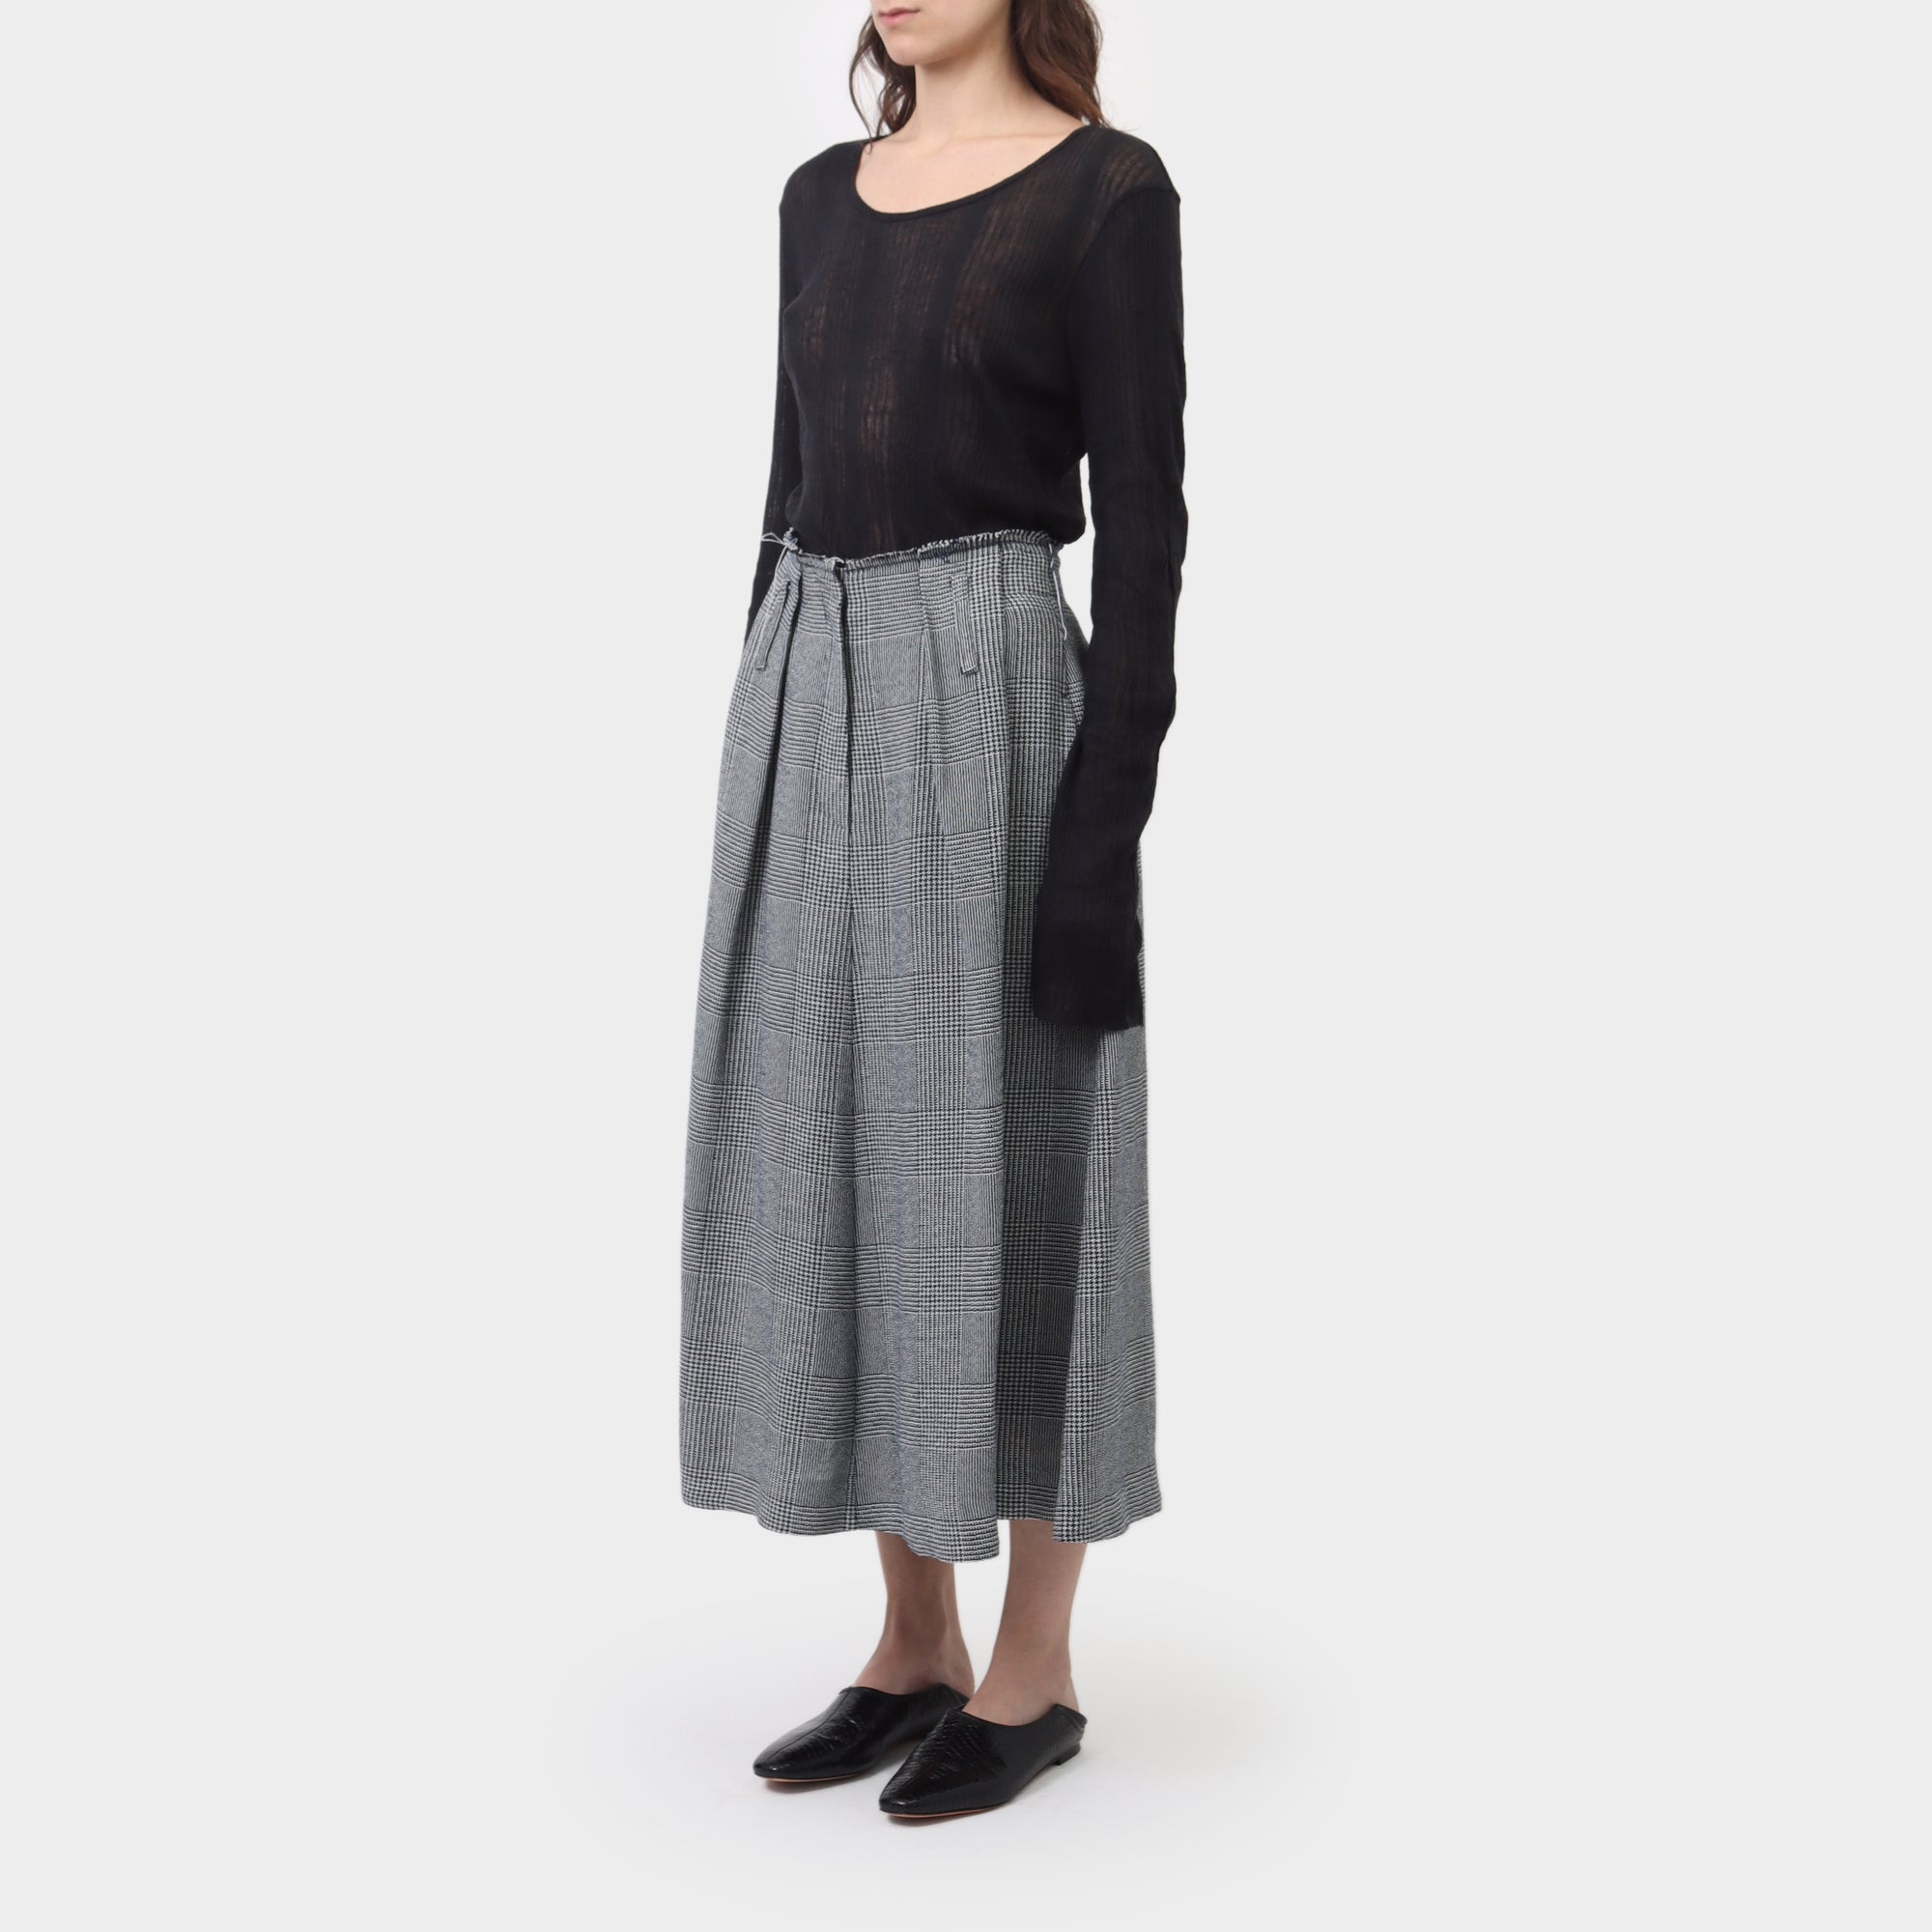 Golden Goose Deluxe Brand Distressed Houndstooth Pleated Skirt